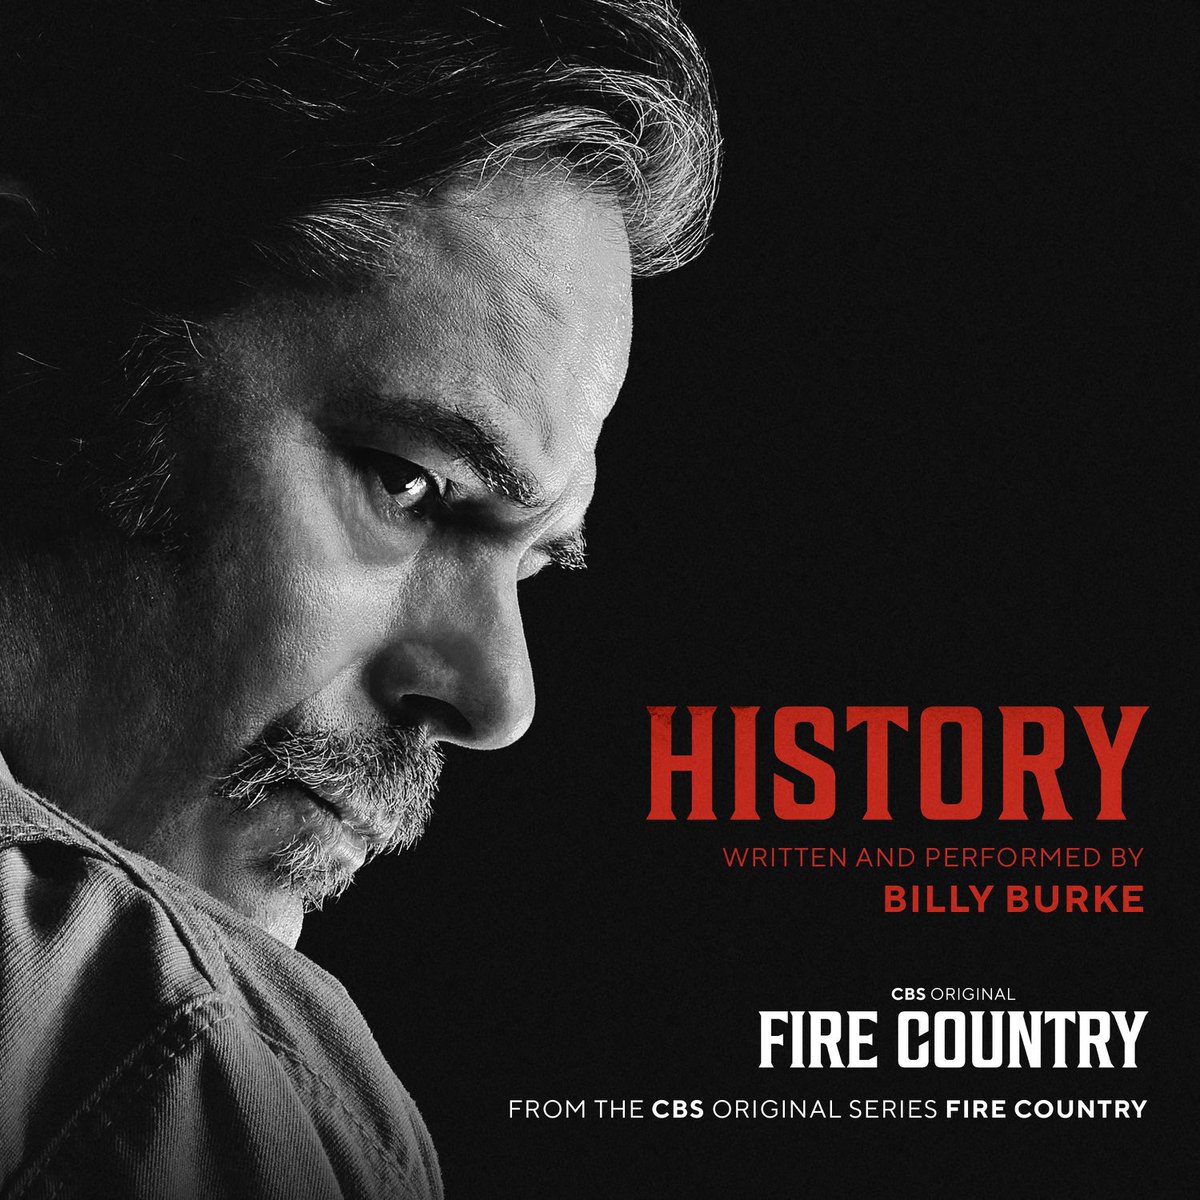 🎙️ #History by #BillyBurke is now available on all major streaming platforms. #FireCountry